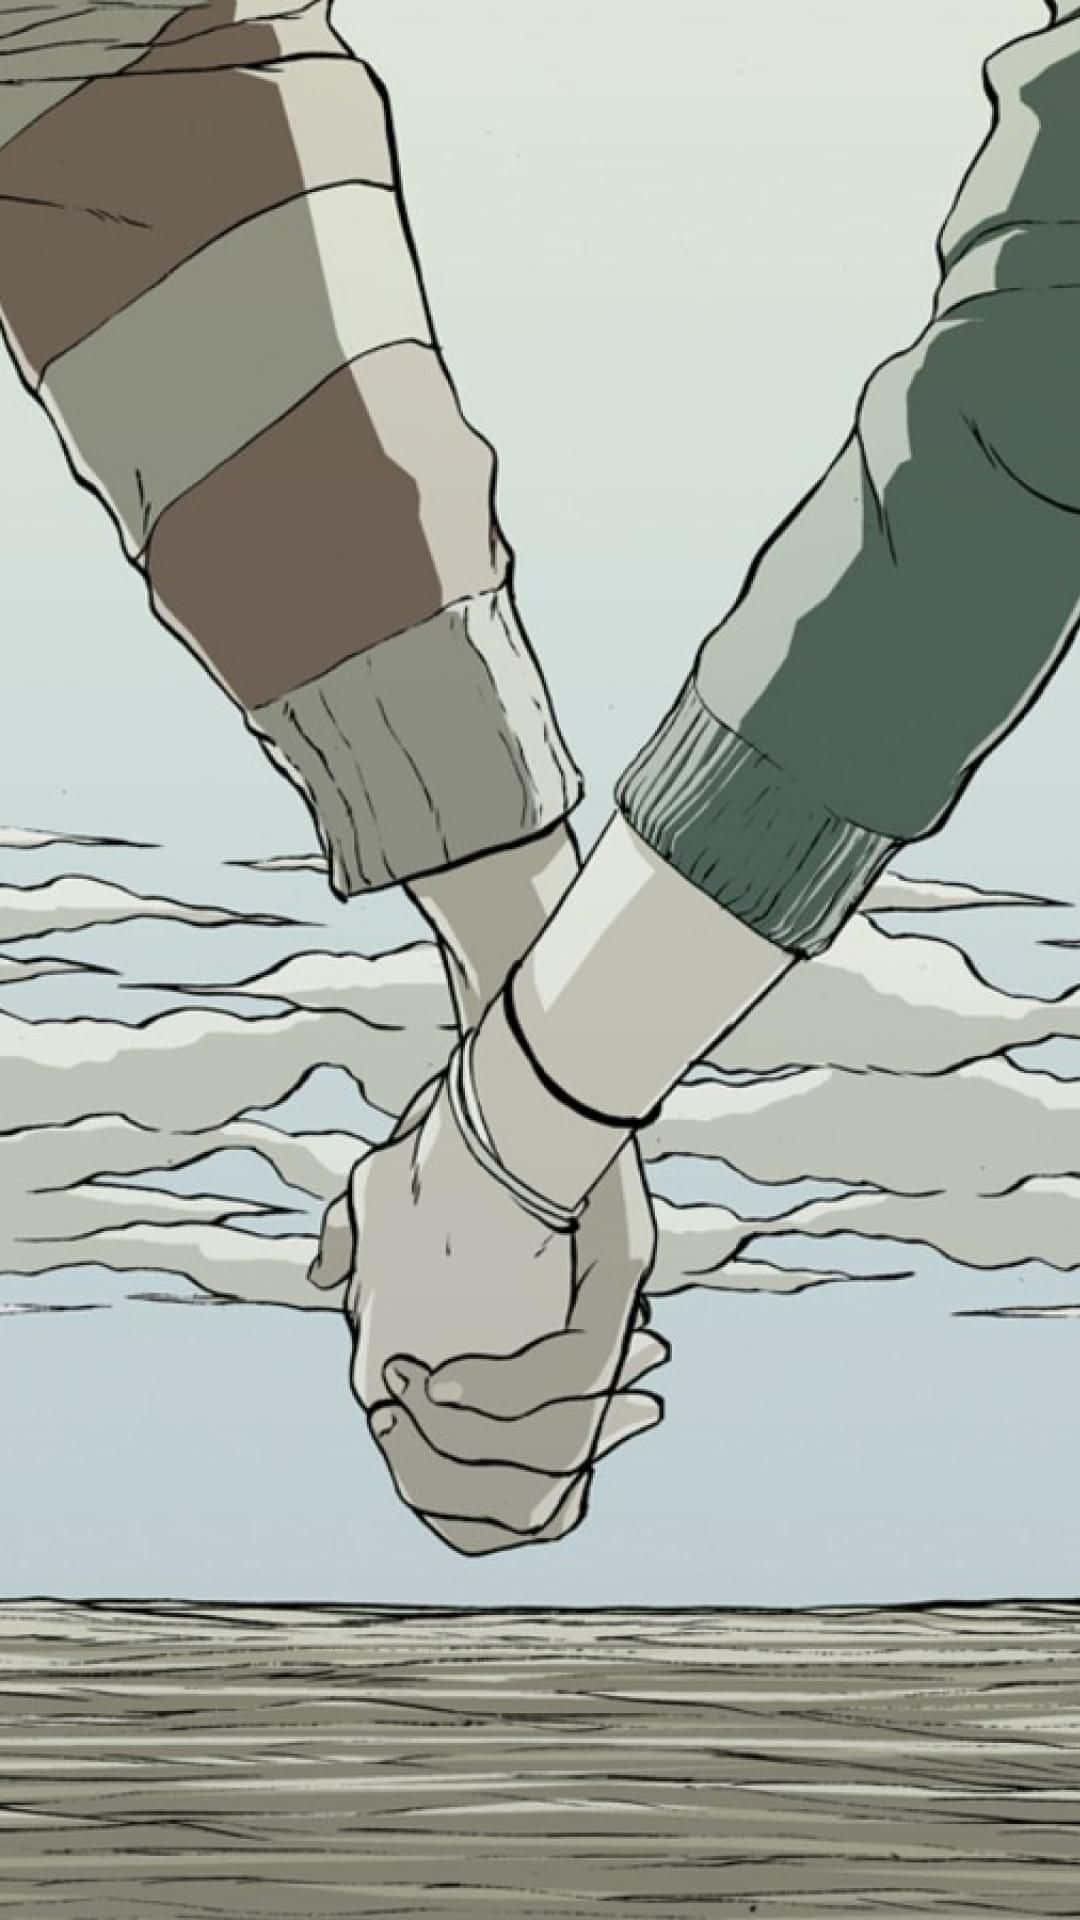 how to draw anime couples holding hands